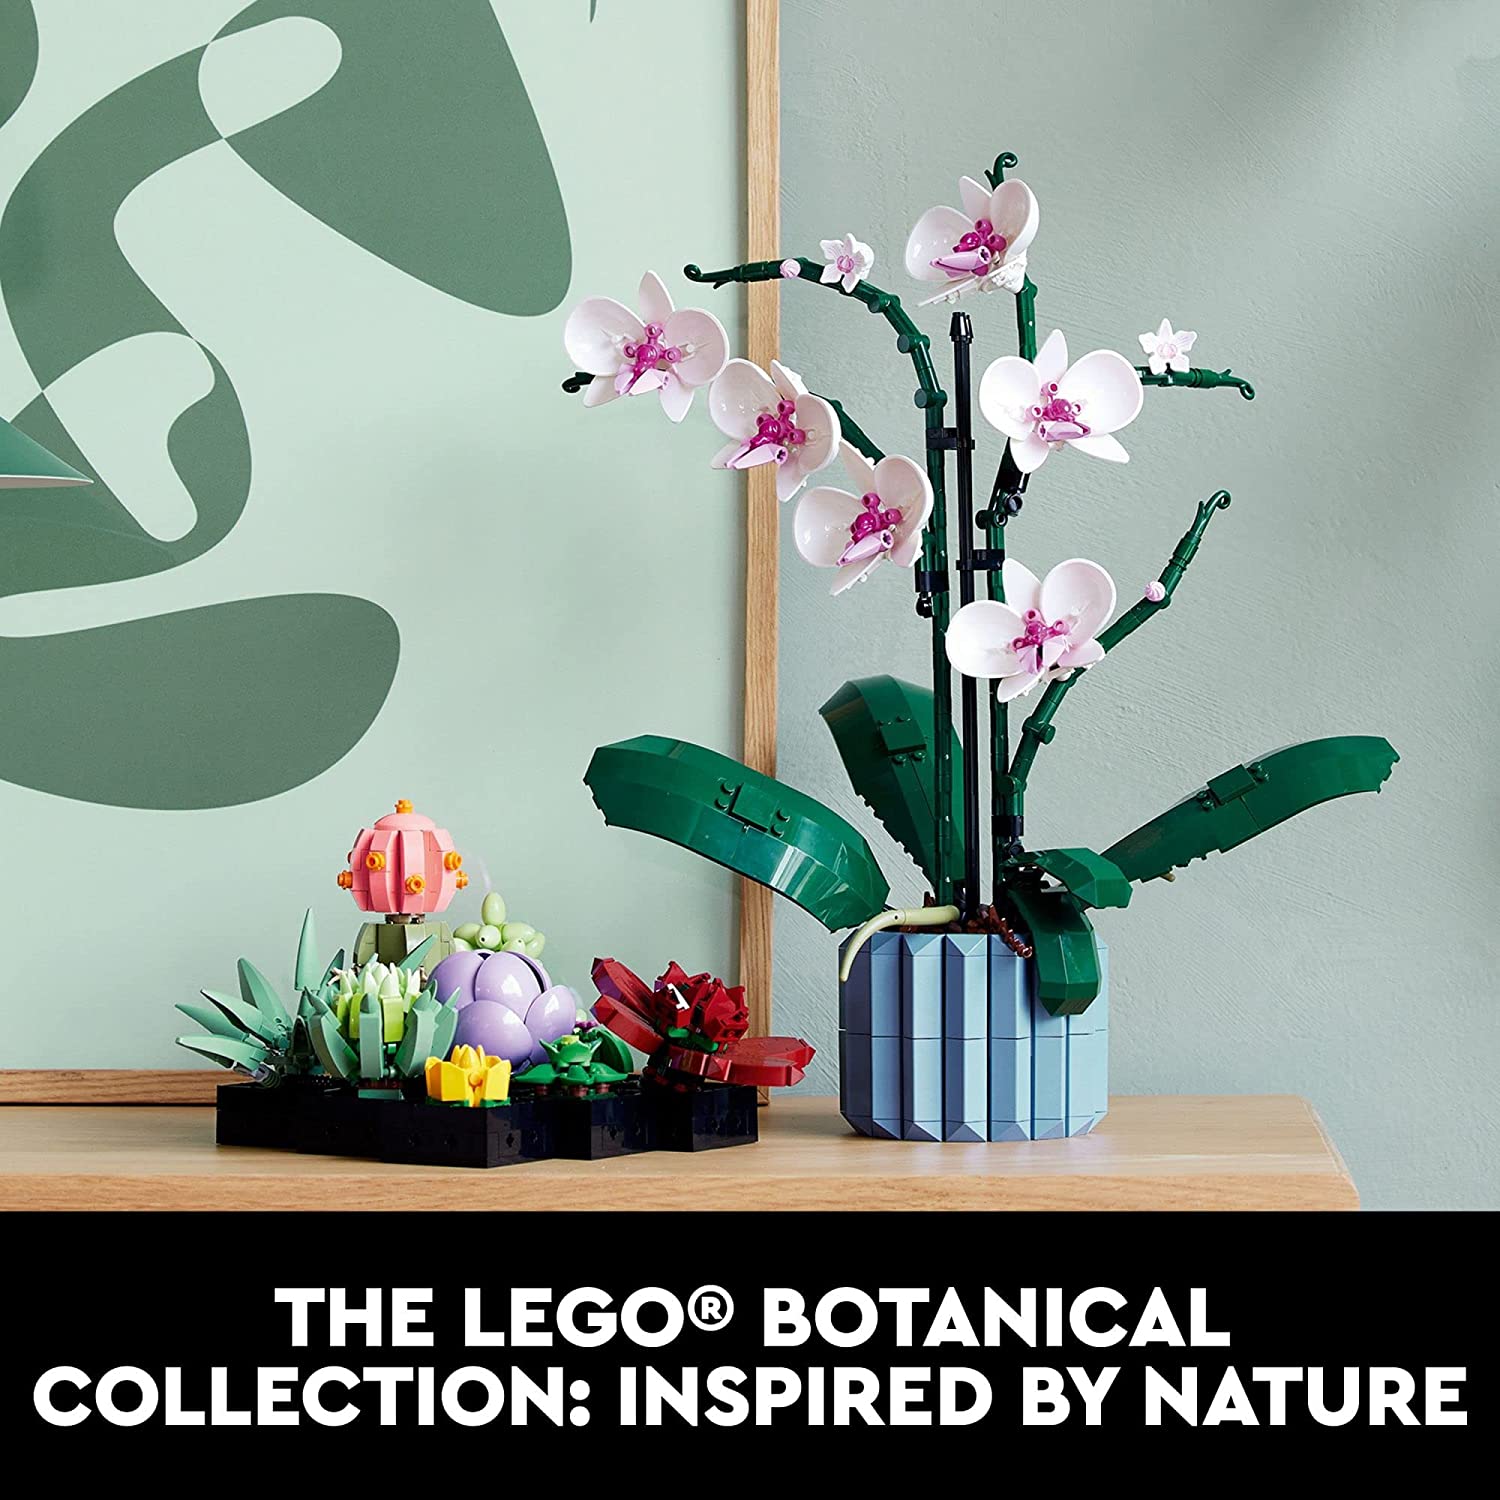 A Lego succulents building kit for adults on a table next to an orchid which is also built from Lego.